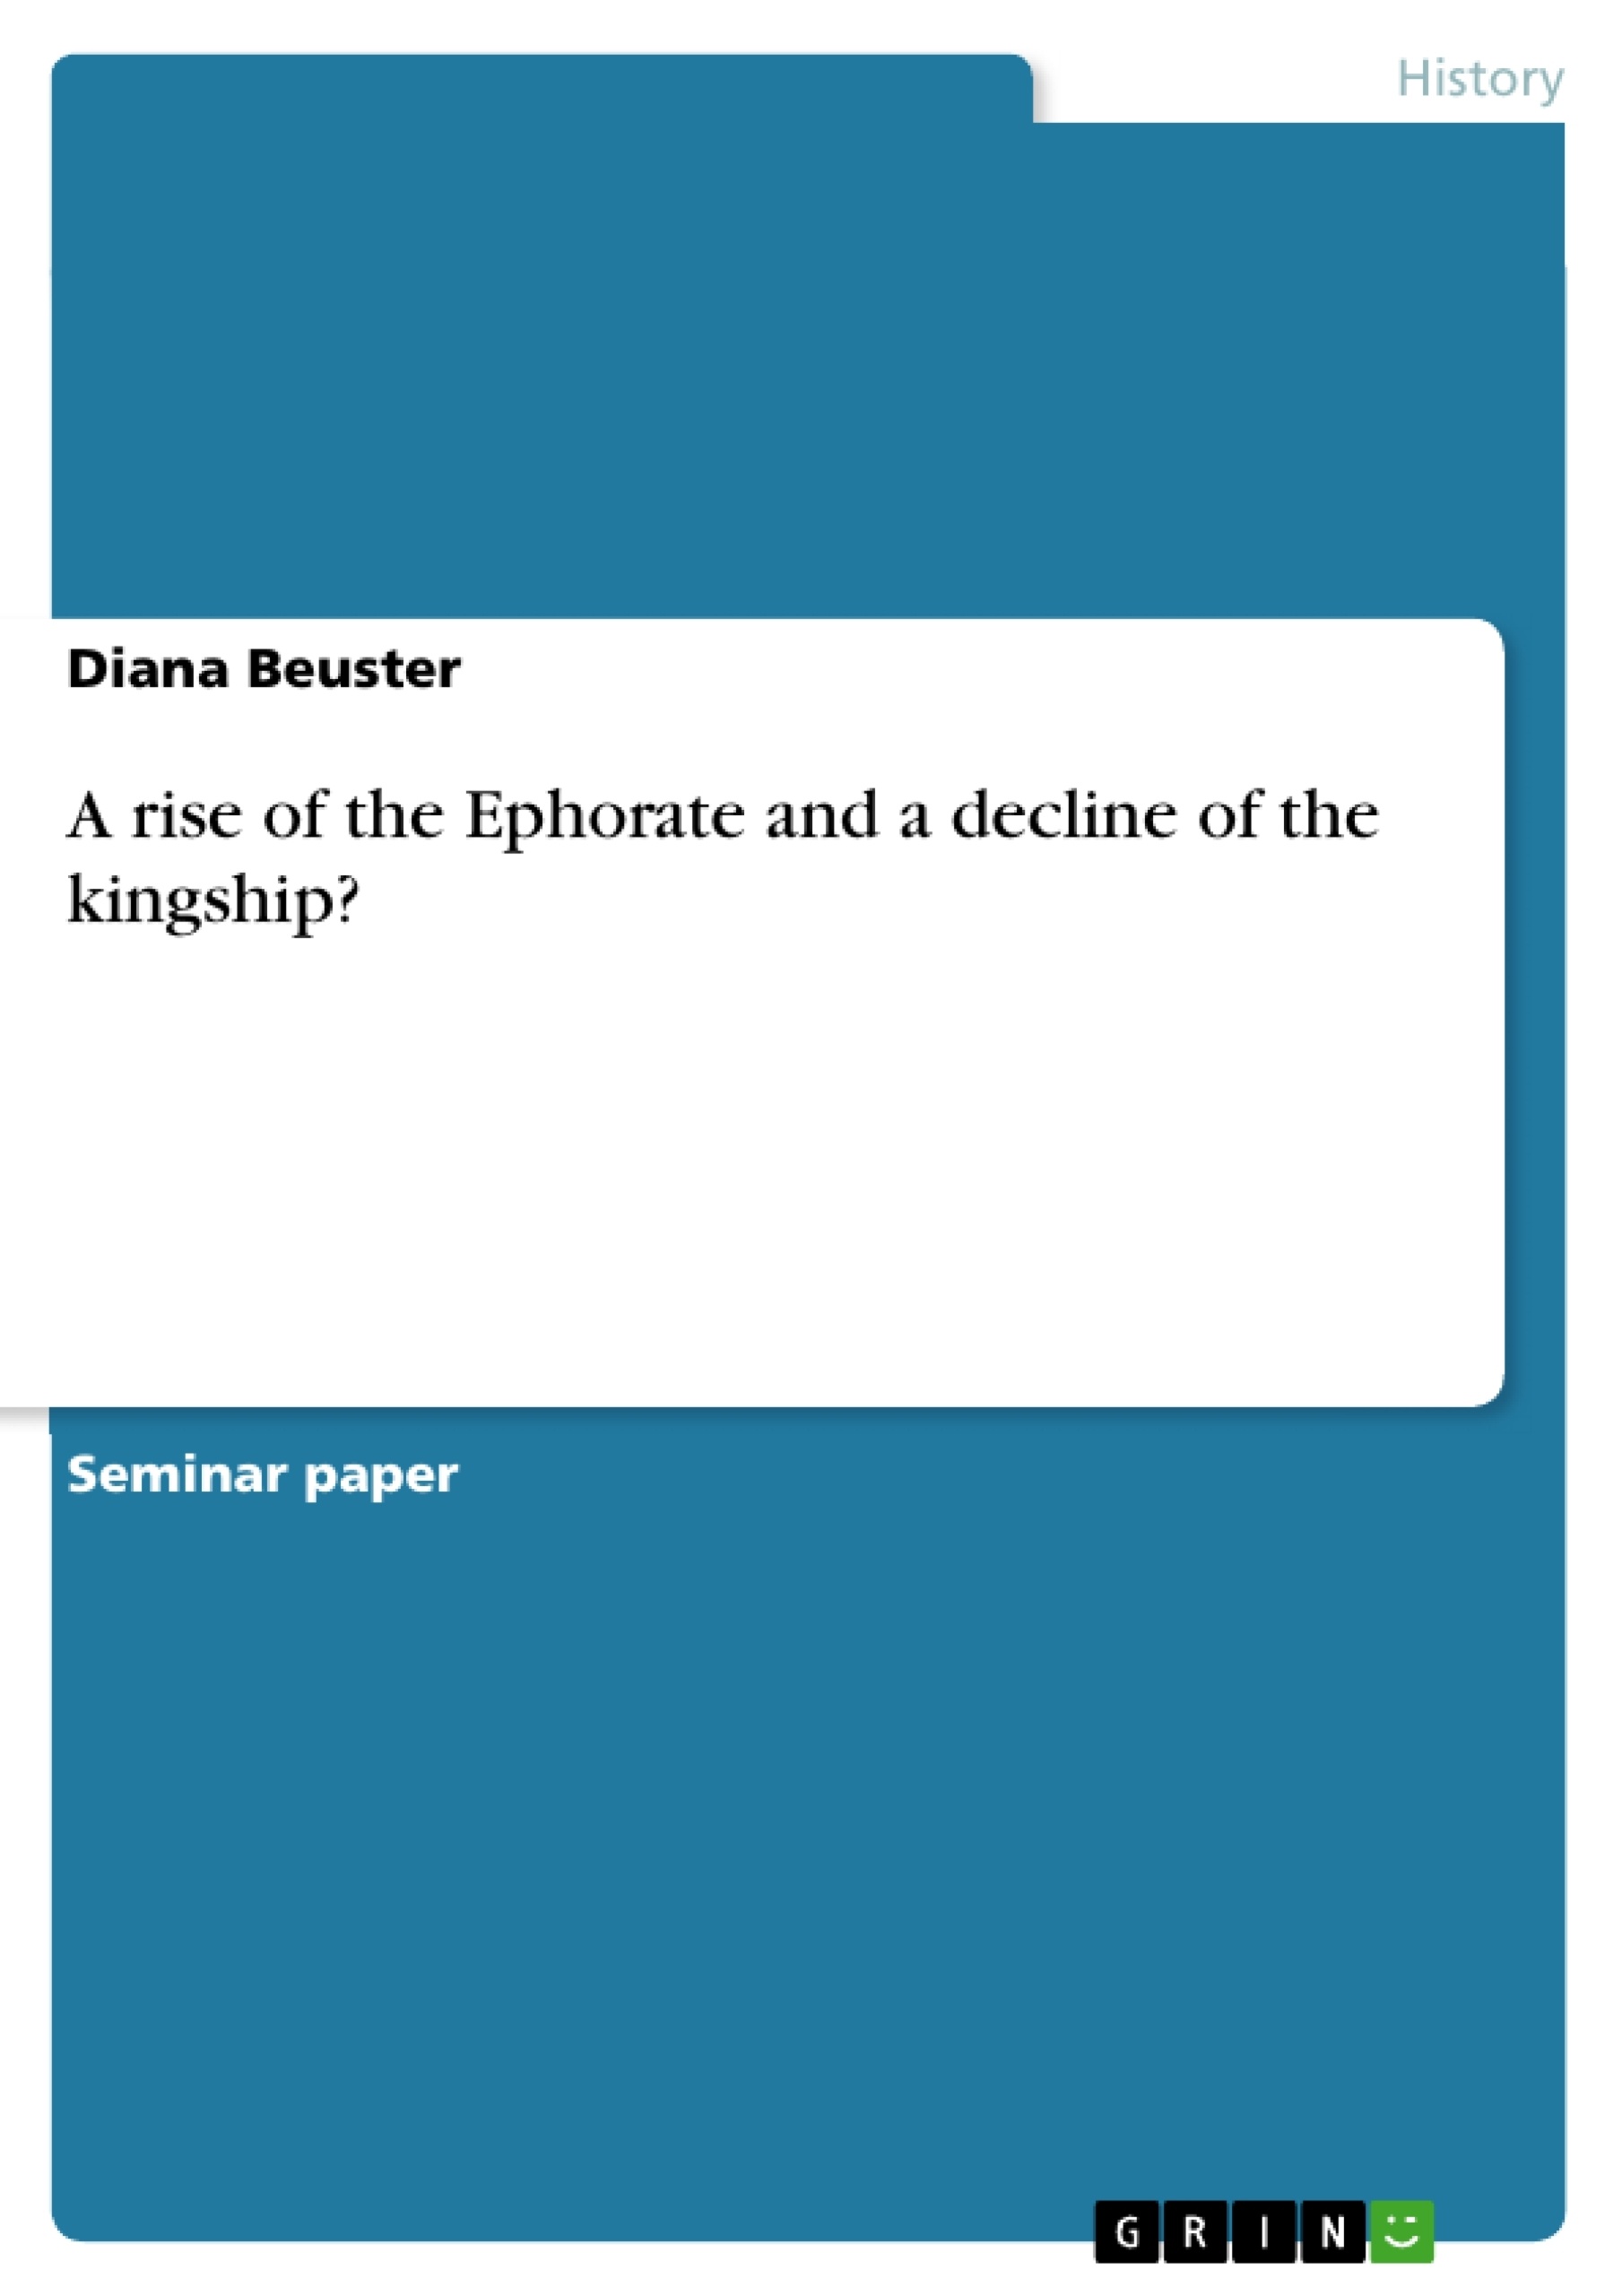 Title: A rise of the Ephorate and a decline of the kingship?